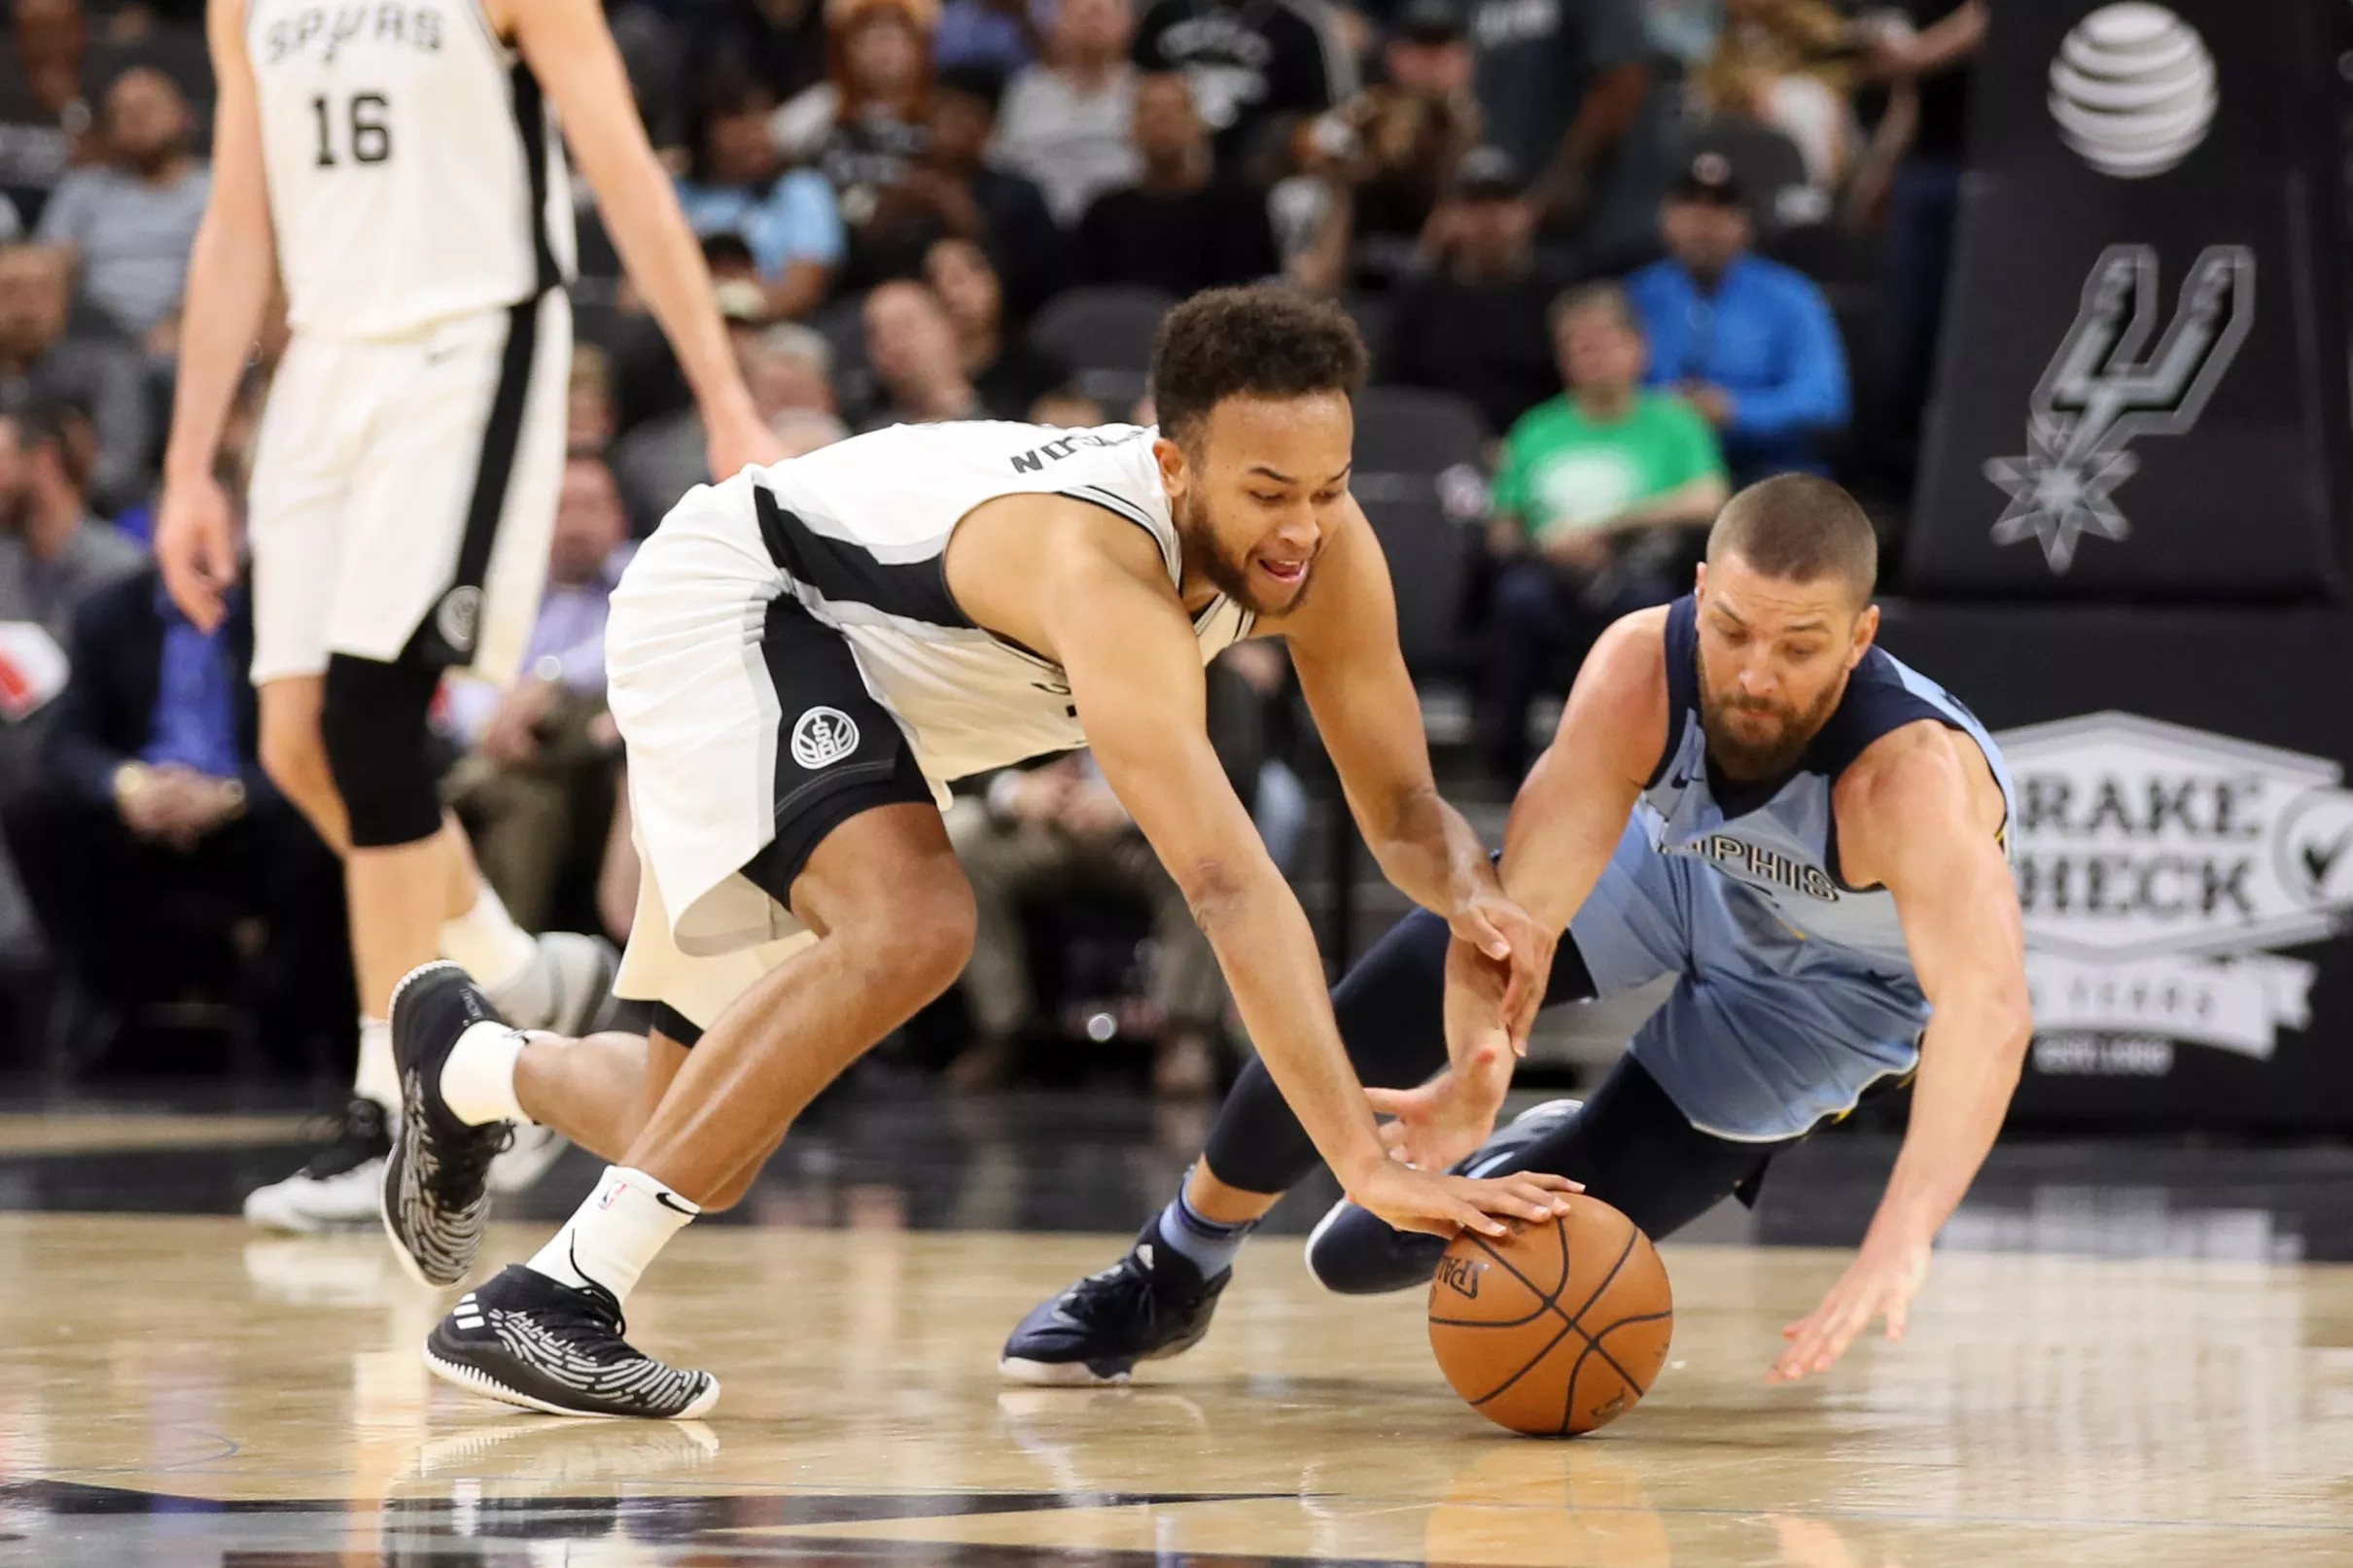 Kyle Anderson nominated for “Assist of the Year”